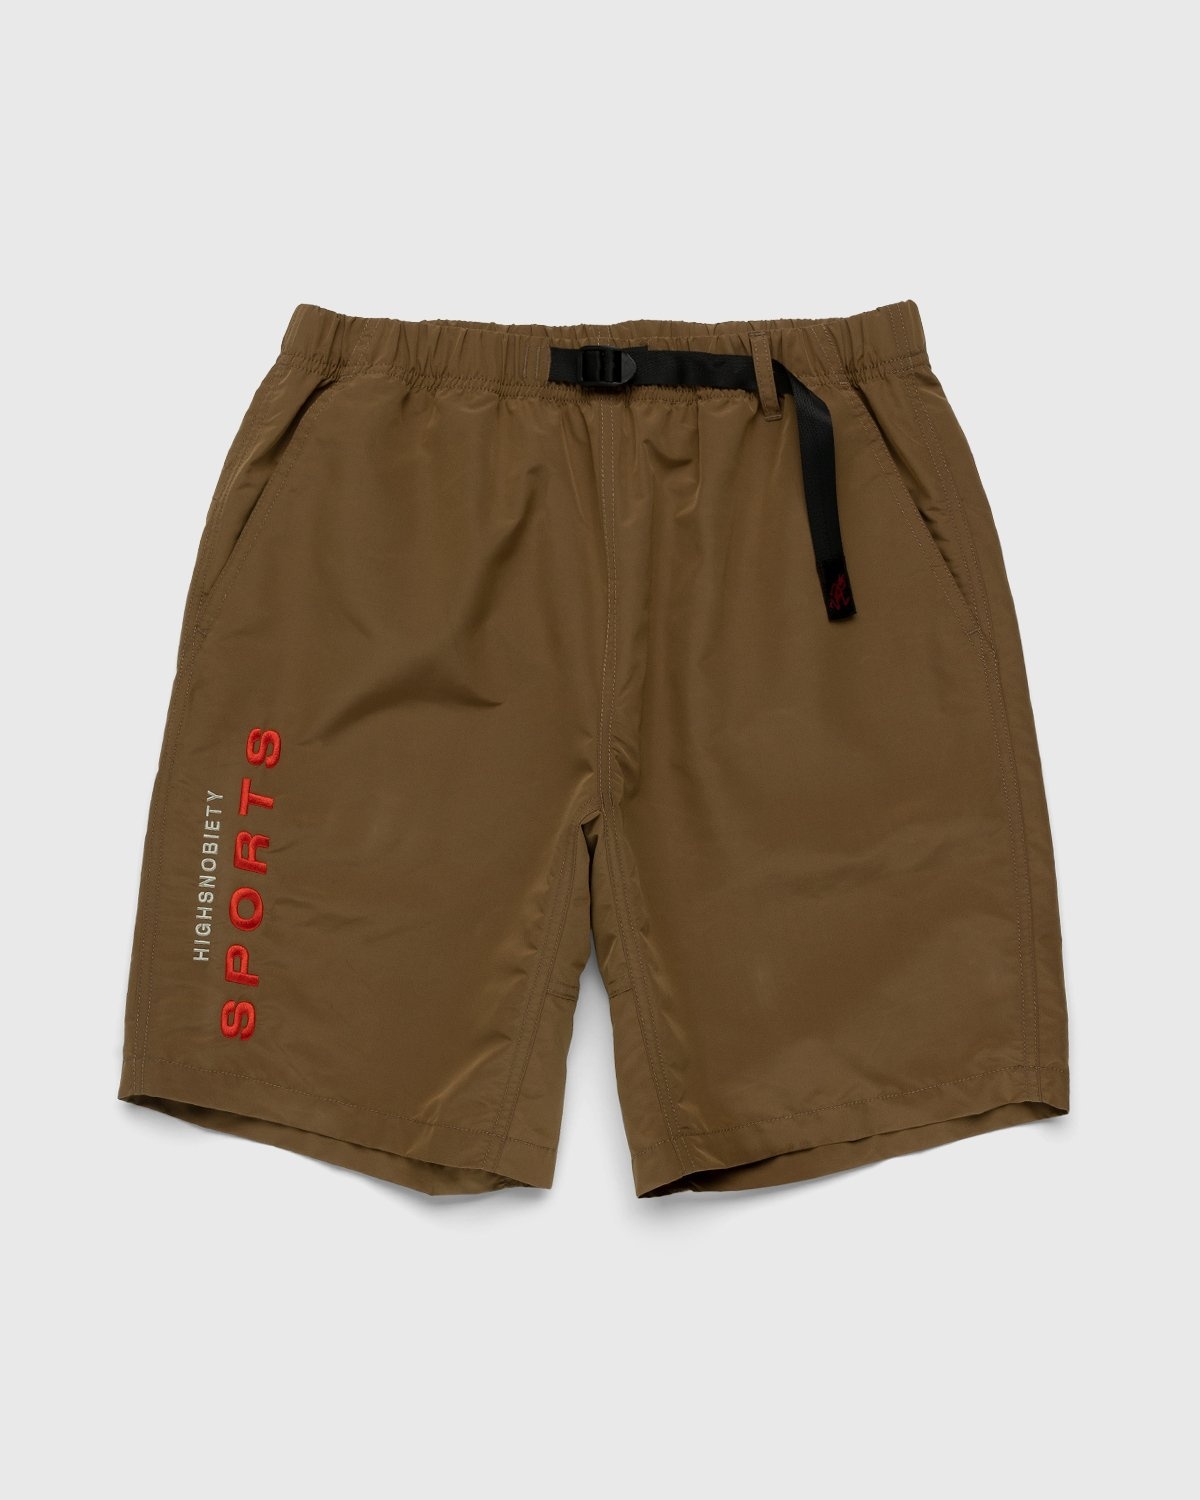 Gramicci x Highsnobiety – HS Sports Shell Packable Shorts Tan - Active Shorts - Brown - Image 1